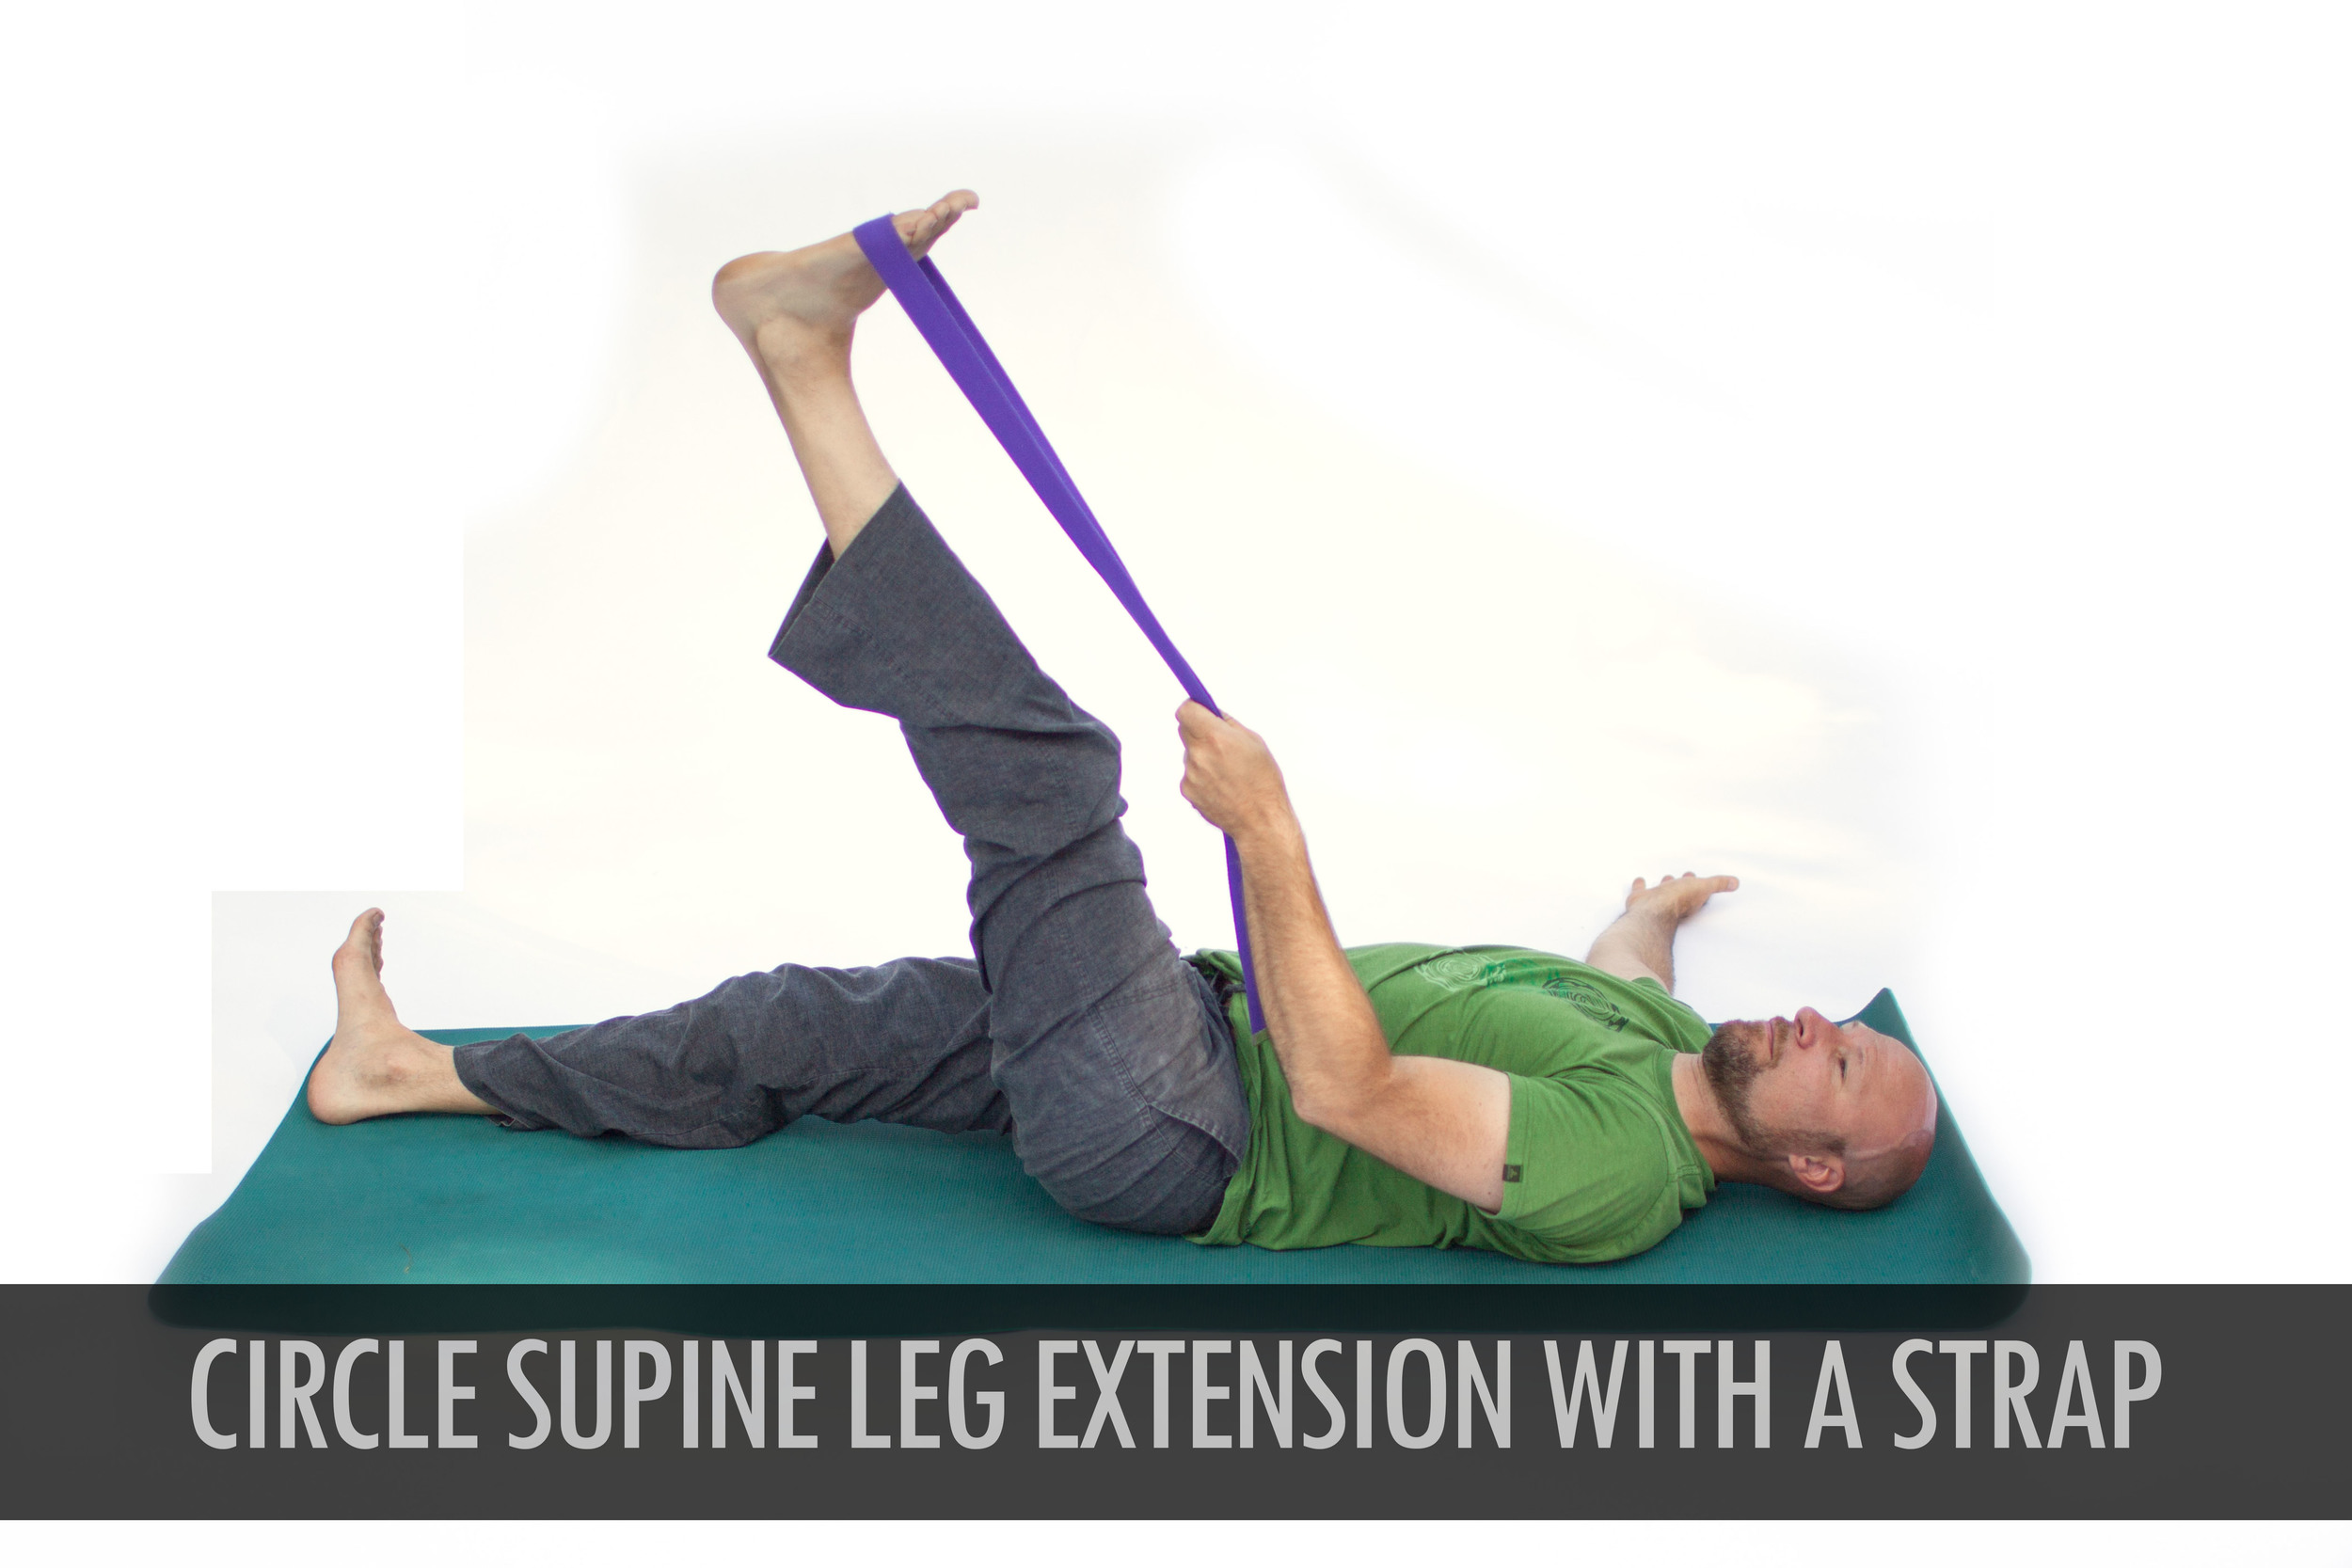 Deep Supine Leg Extension With A Strap.jpg